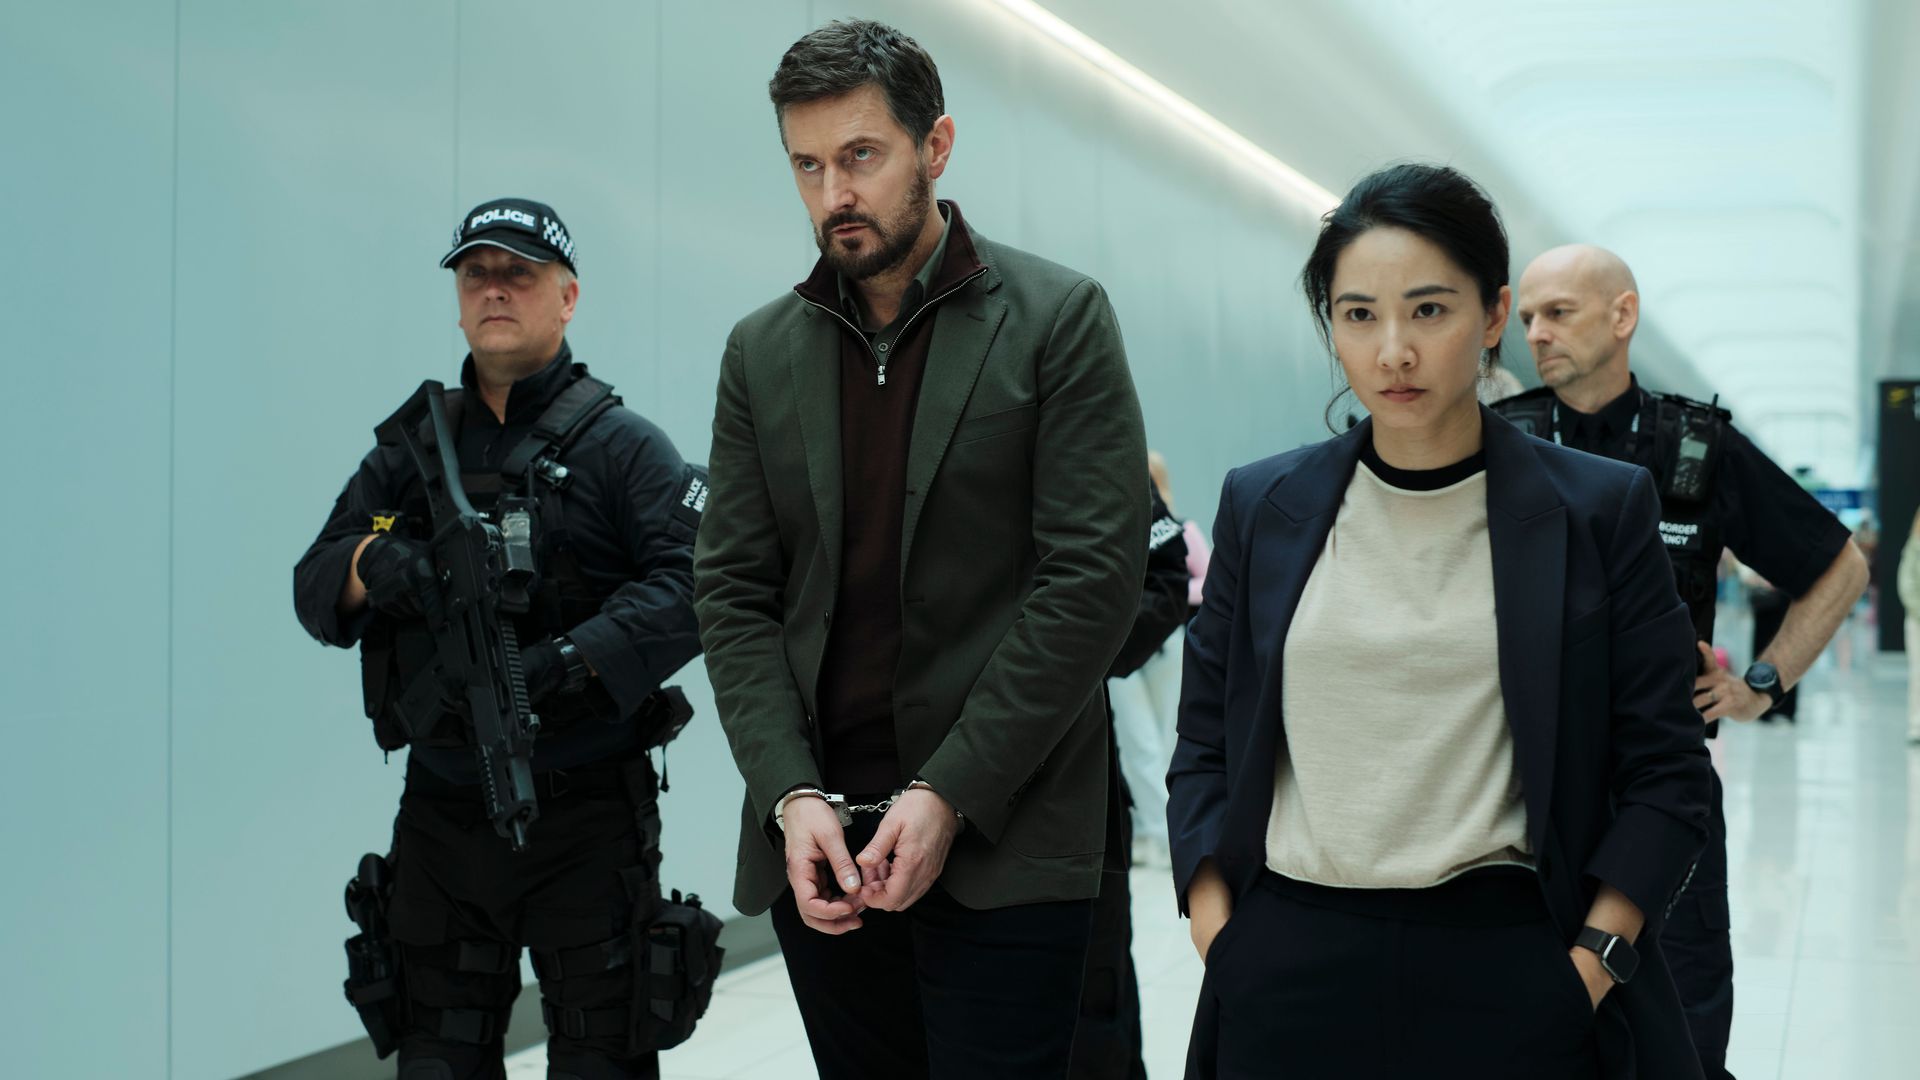 ITV's Red Eye: All you need to know about Richard Armitage drama from cast, plot details, filming locations, and release schedule